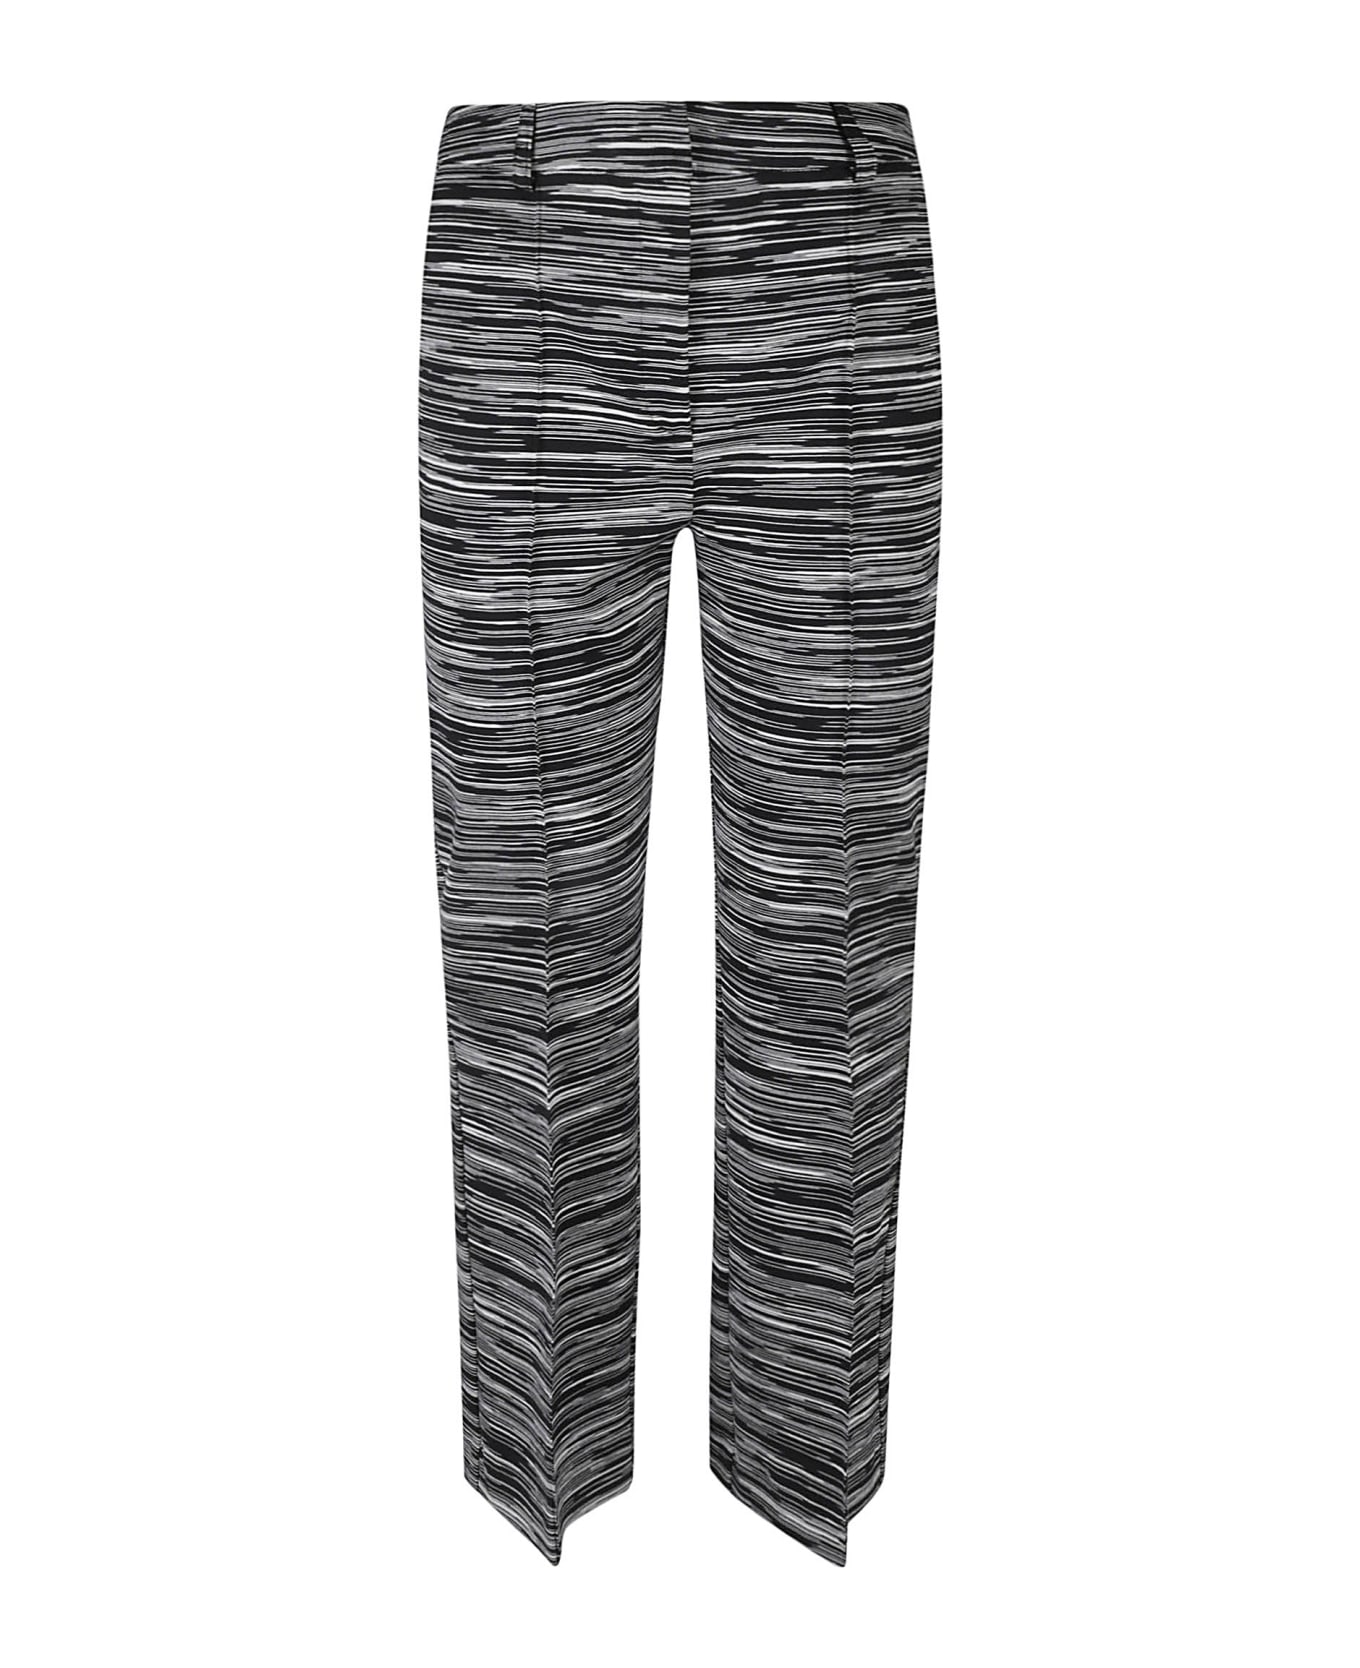 Missoni Concealed Printed Trousers - Black/White